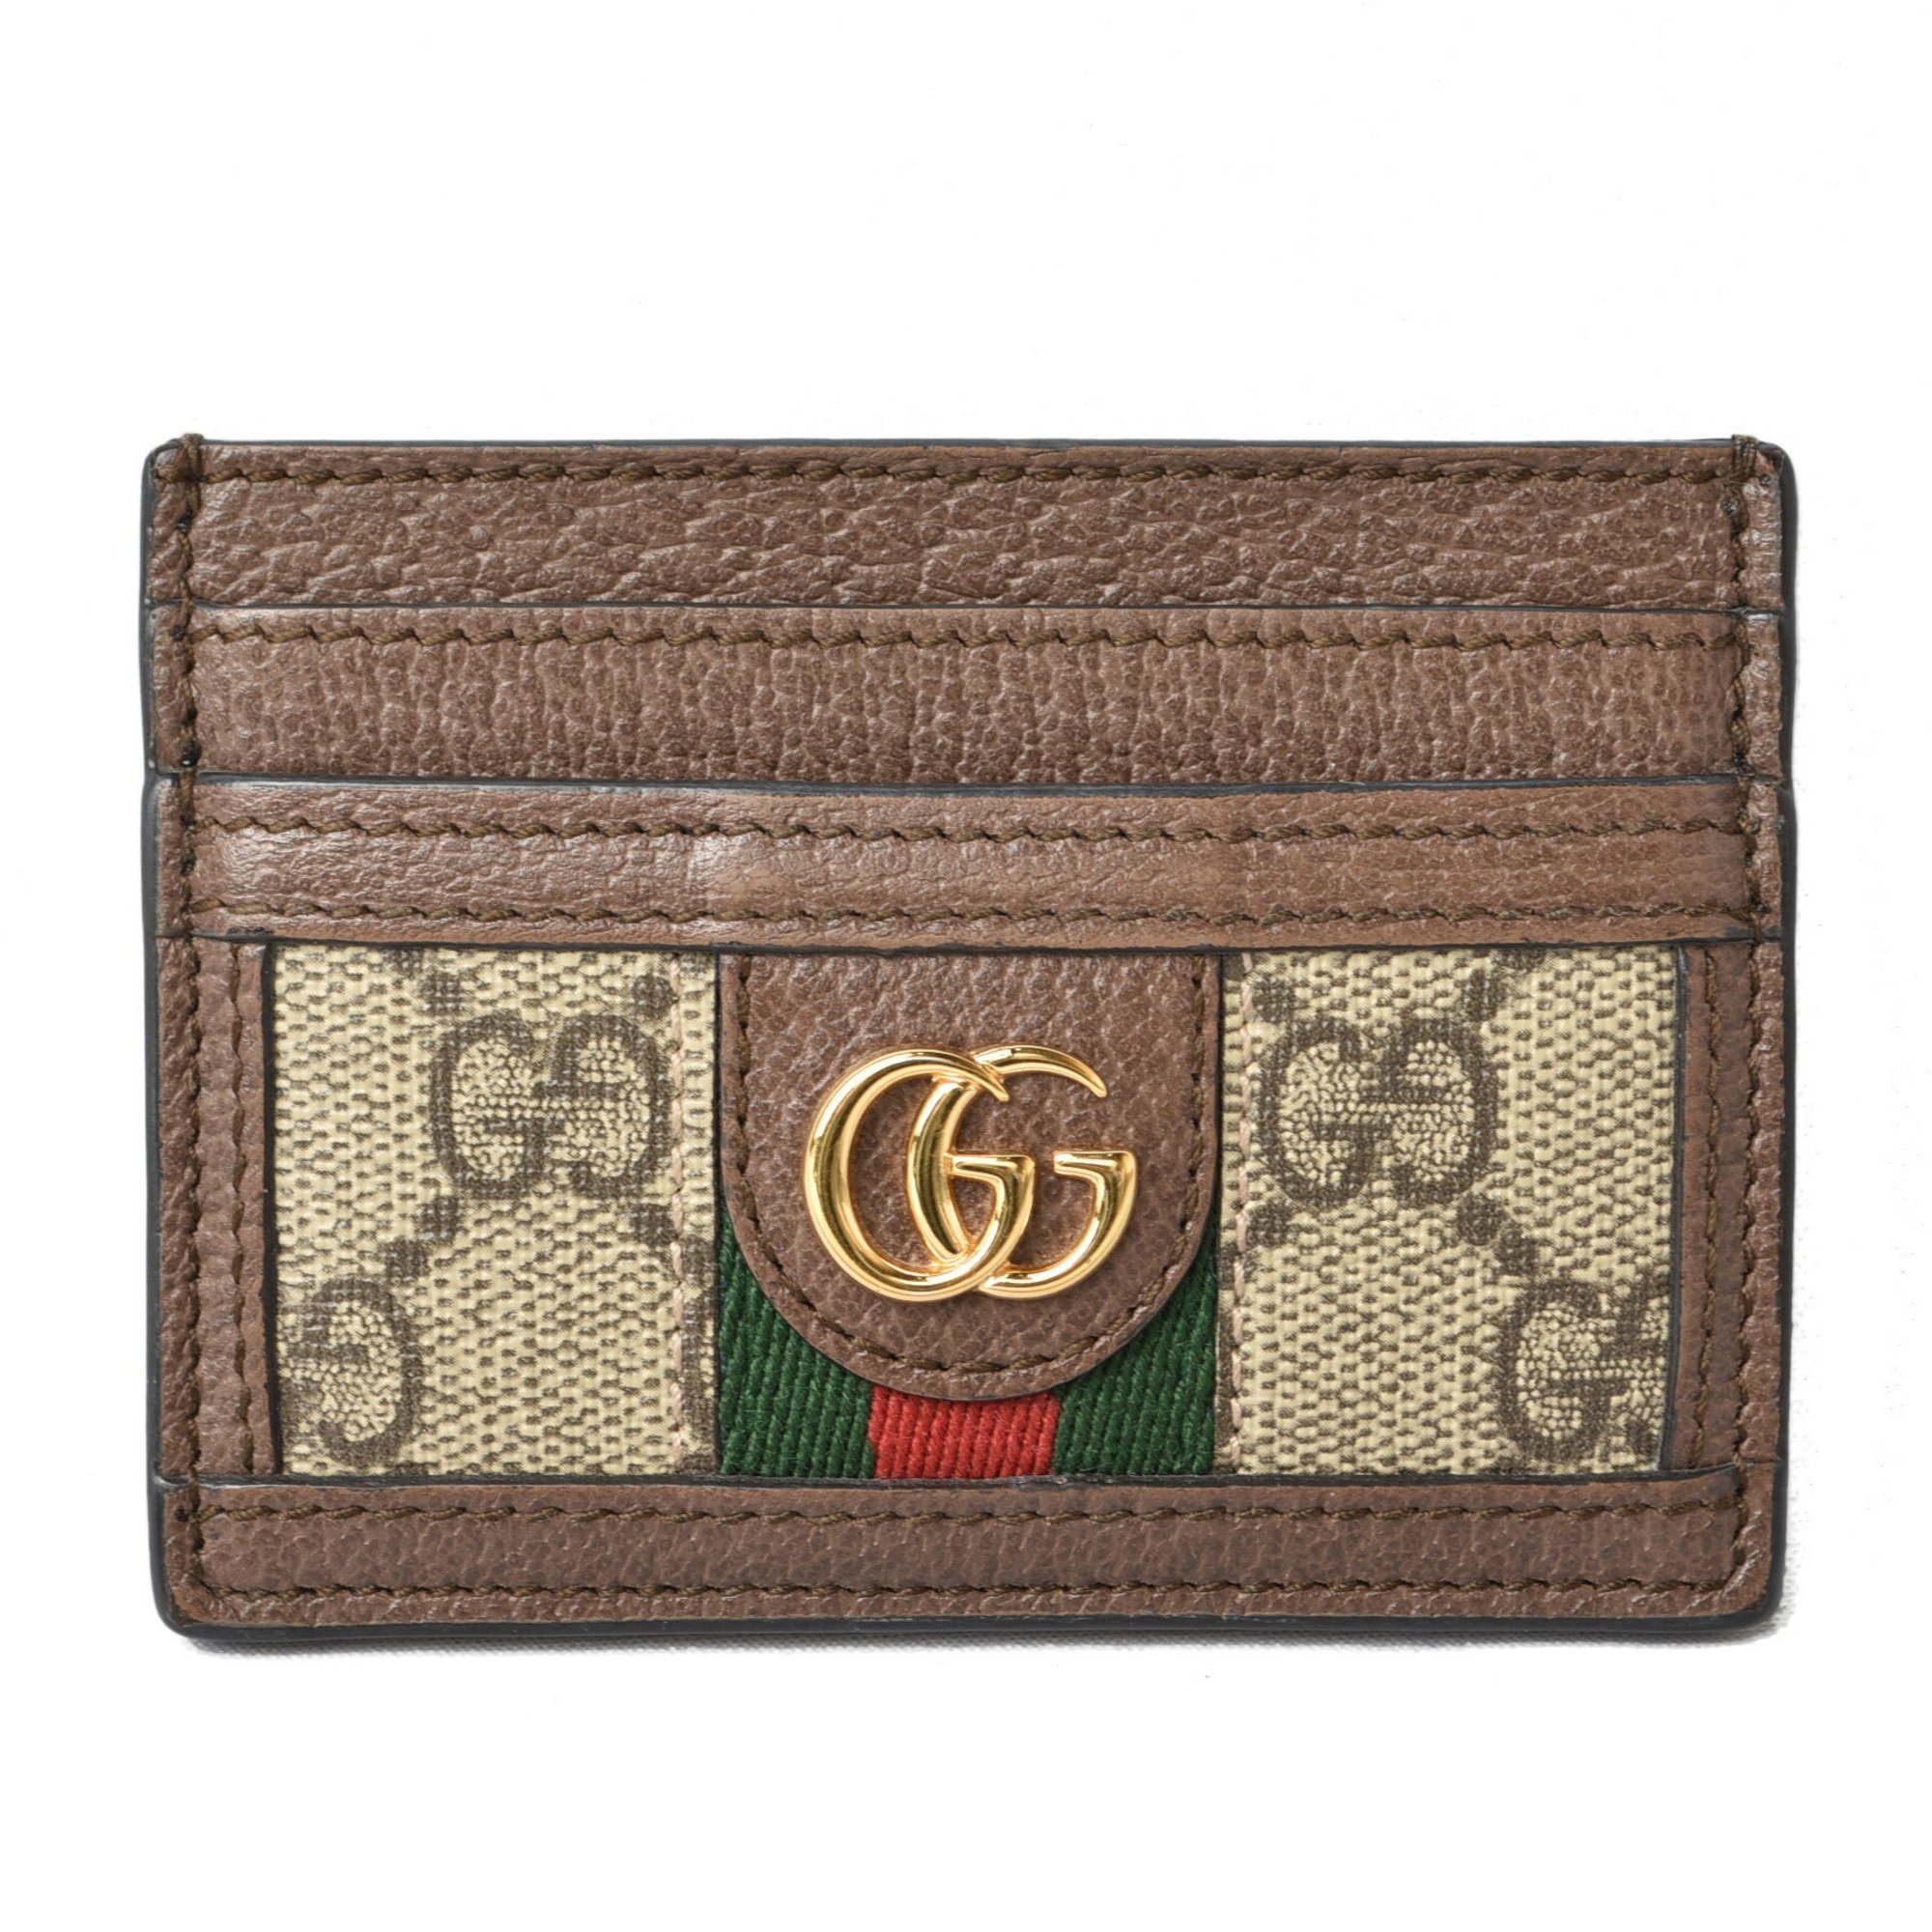 Gucci Card Case Business Holder GUCCI Beige Brown 5523159 96IWG 8745 Ophidia GG Supreme